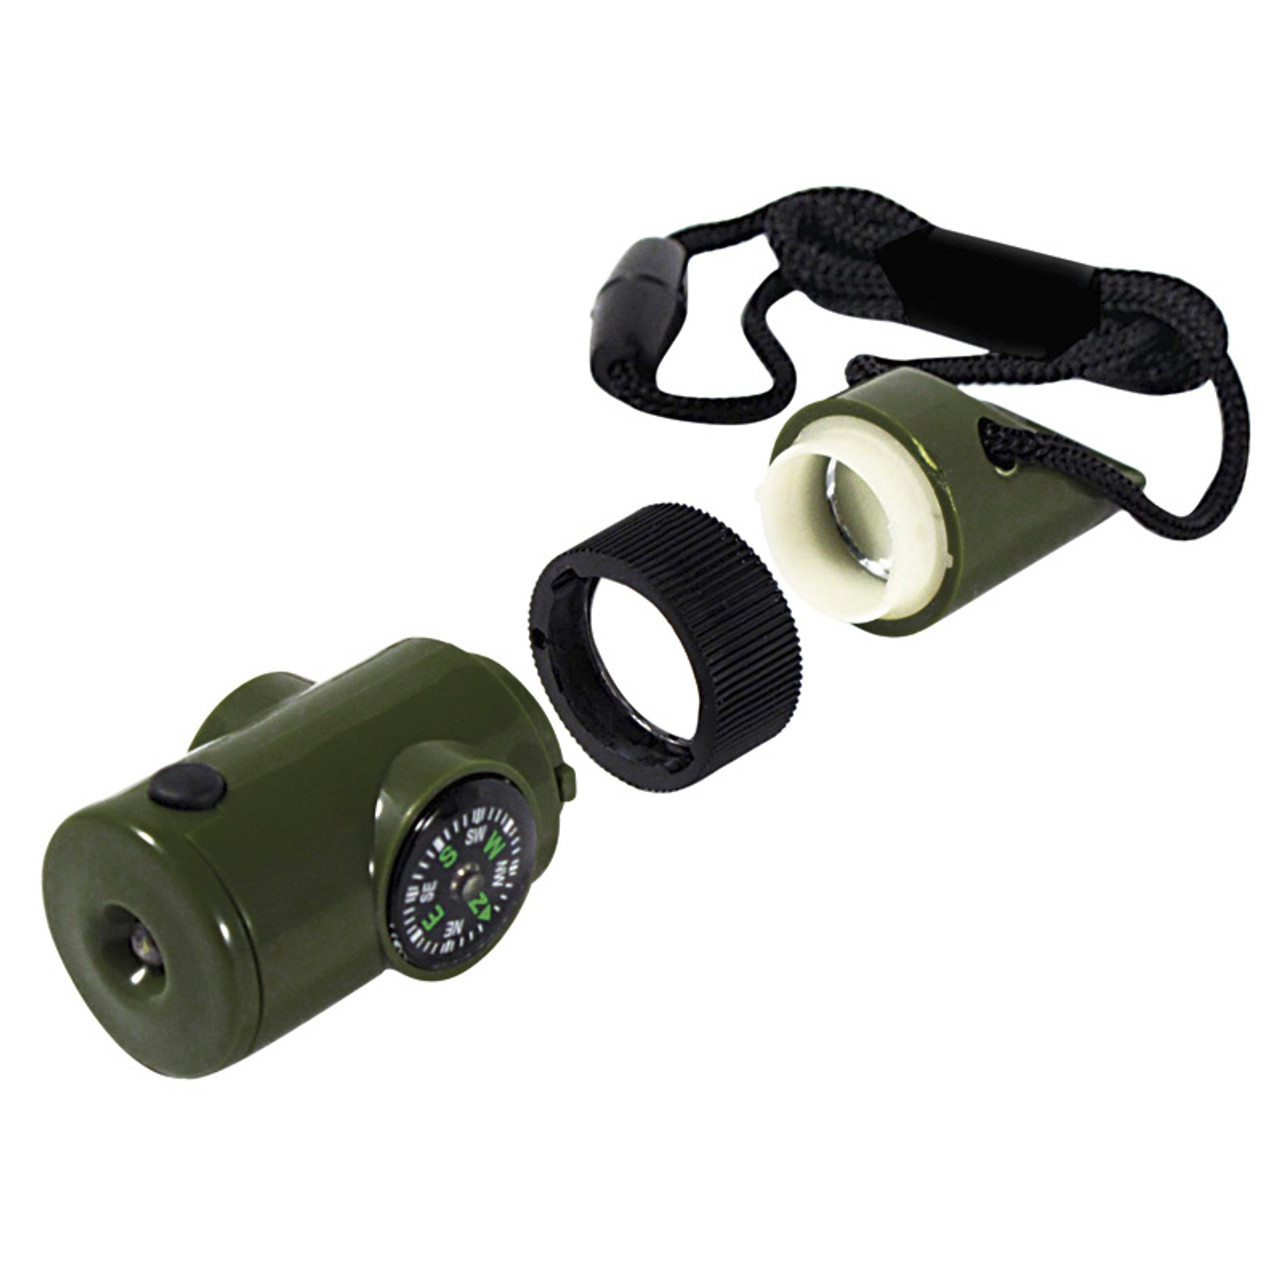 Signal Mirror Multifunctional Mountaineering With Compass Survival